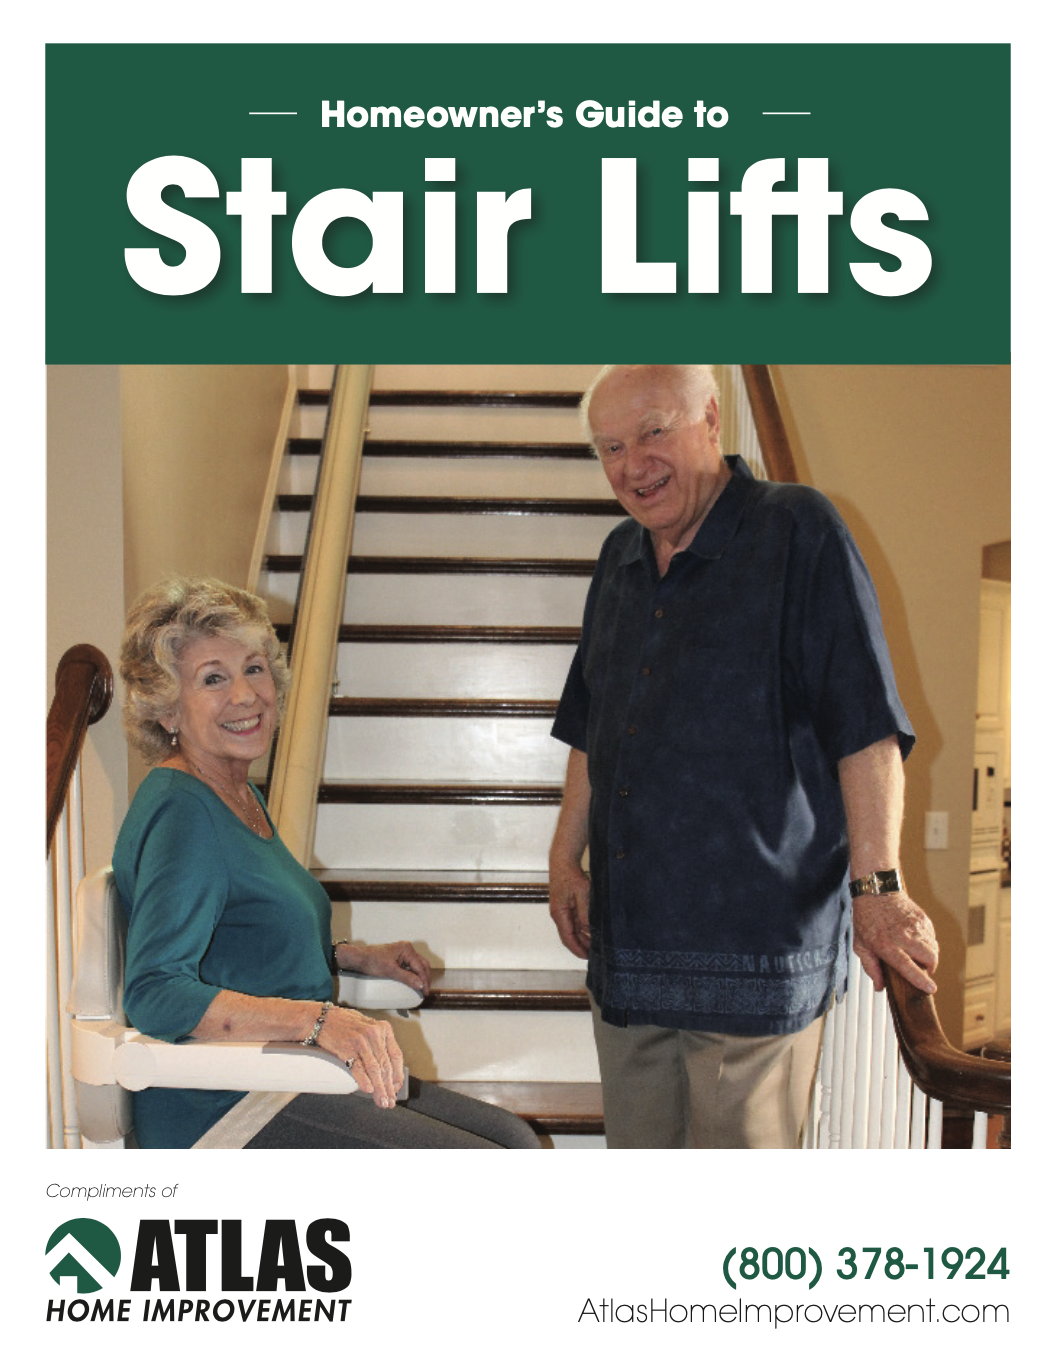 Homeowner's Guide to Stairlifts